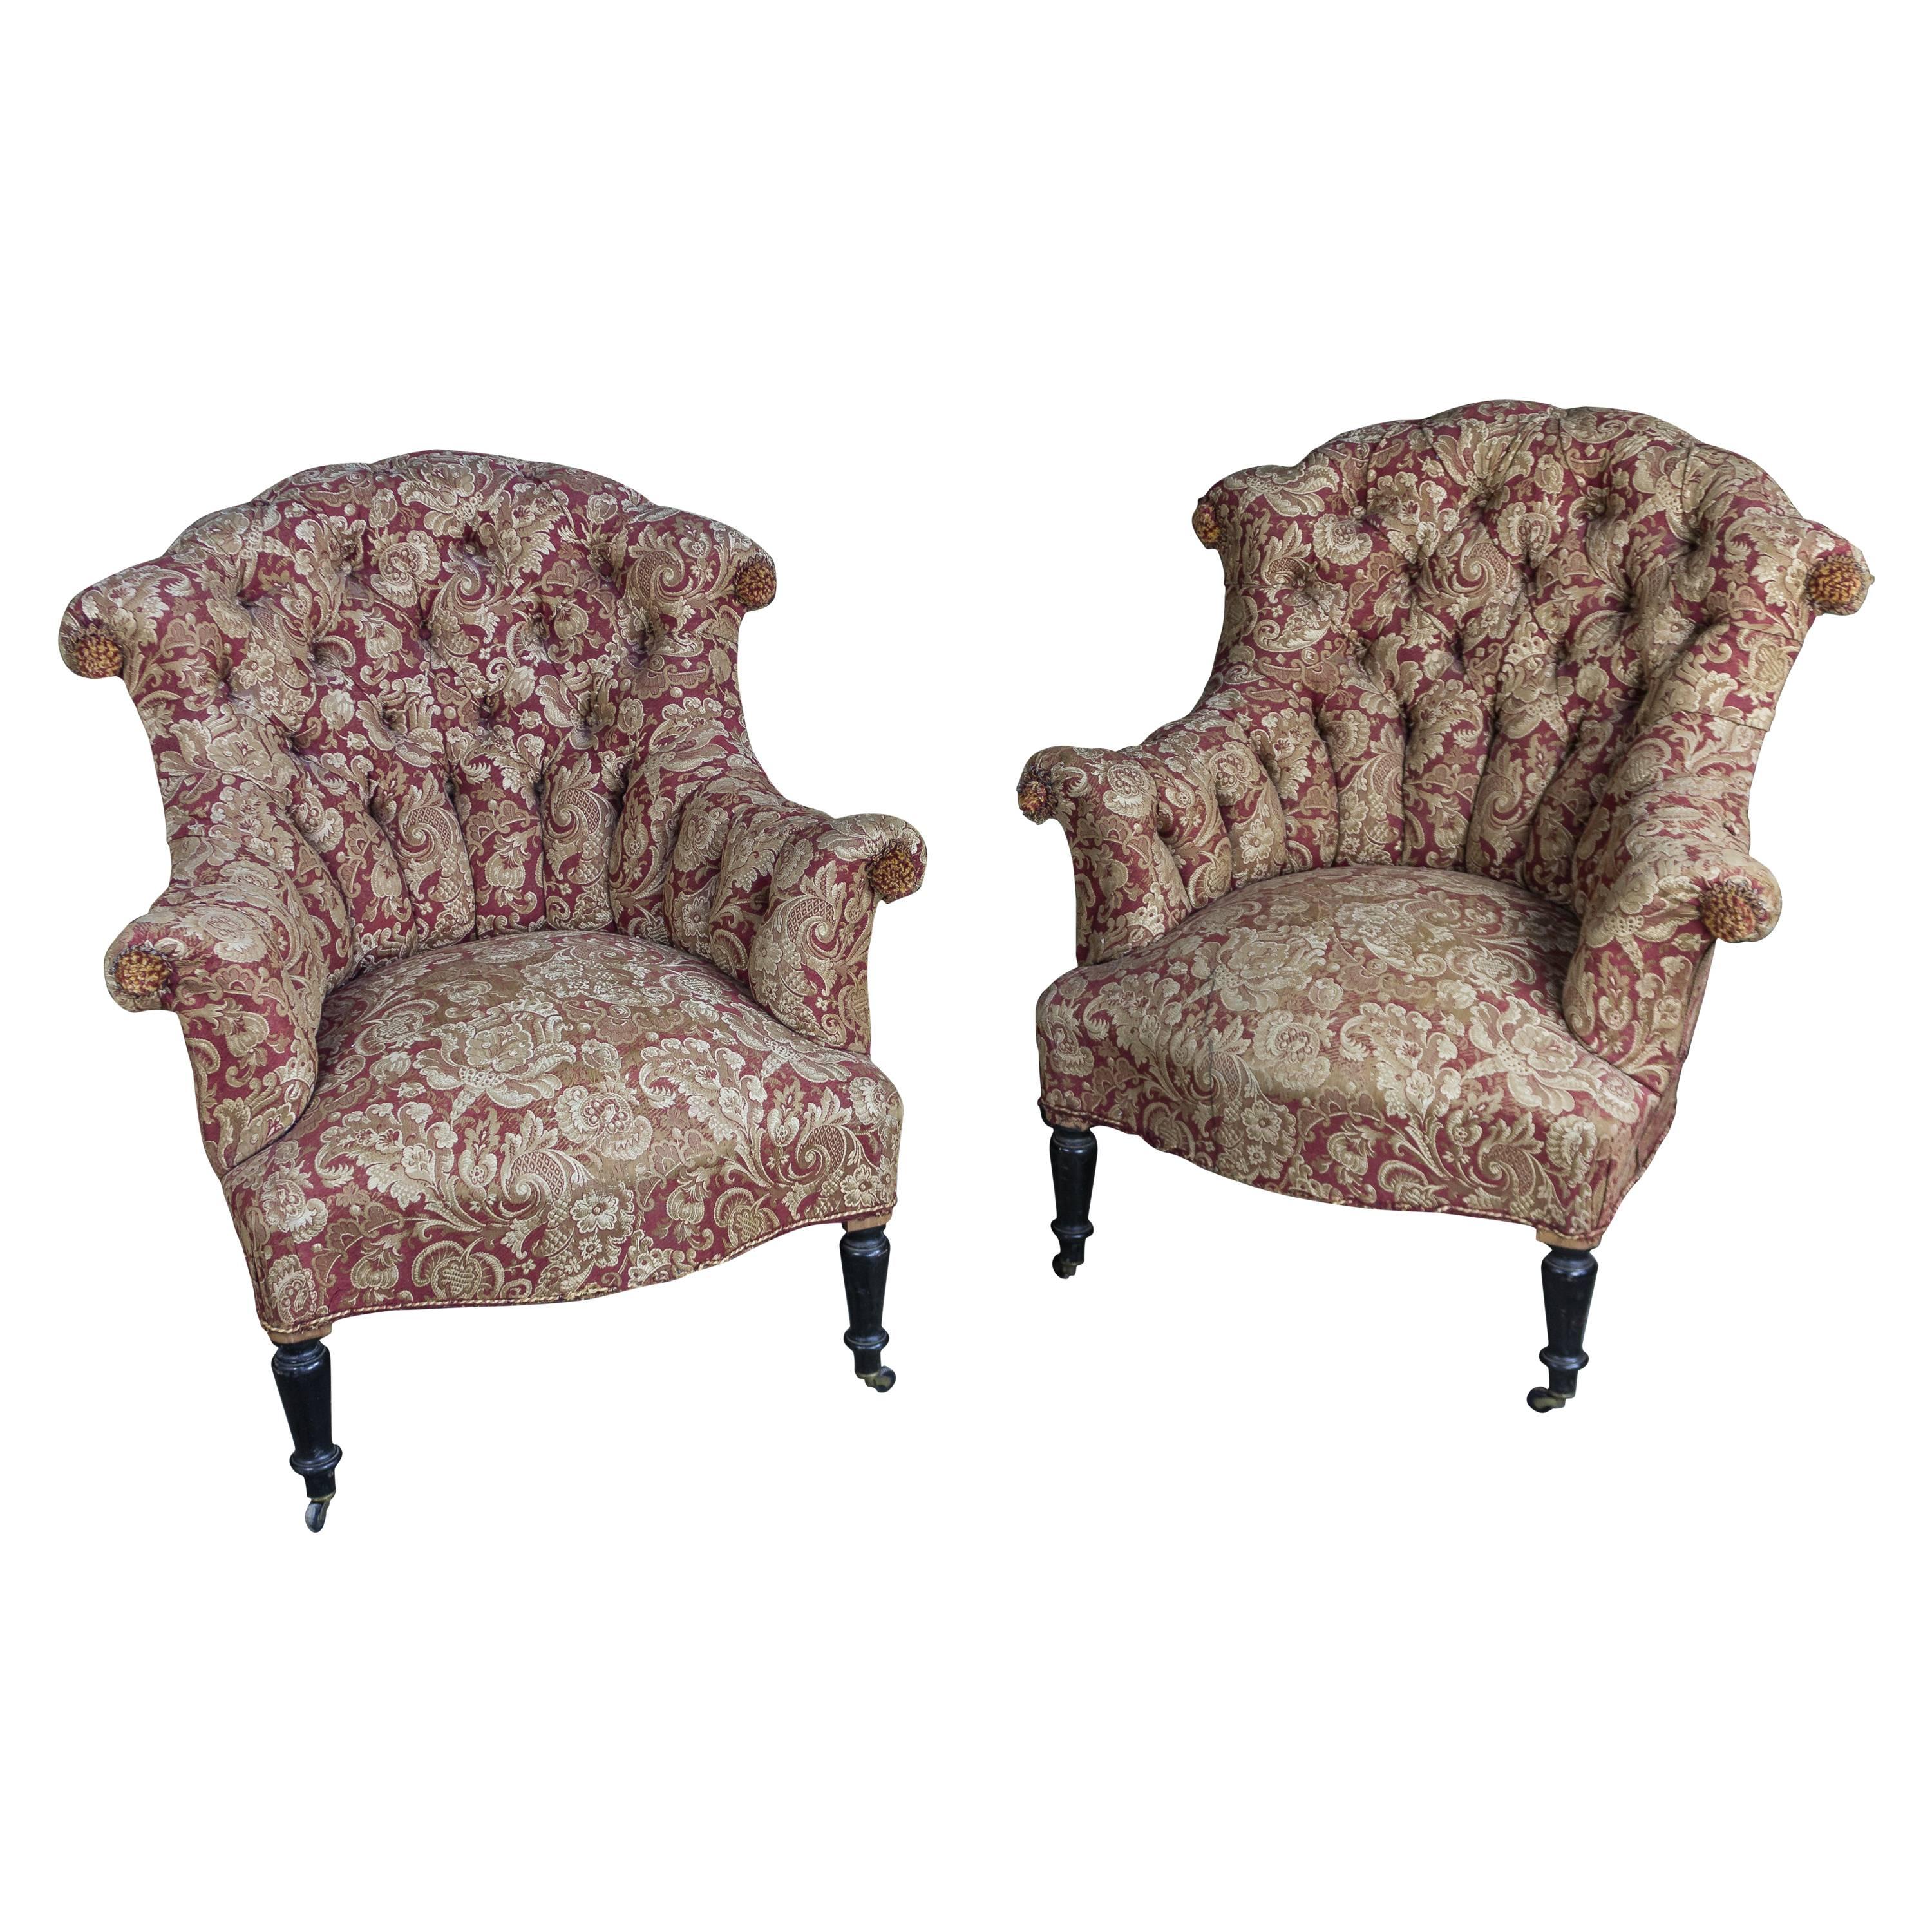 Pair of Tufted and Scrolled Back Chairs in Printed Velvet For Sale